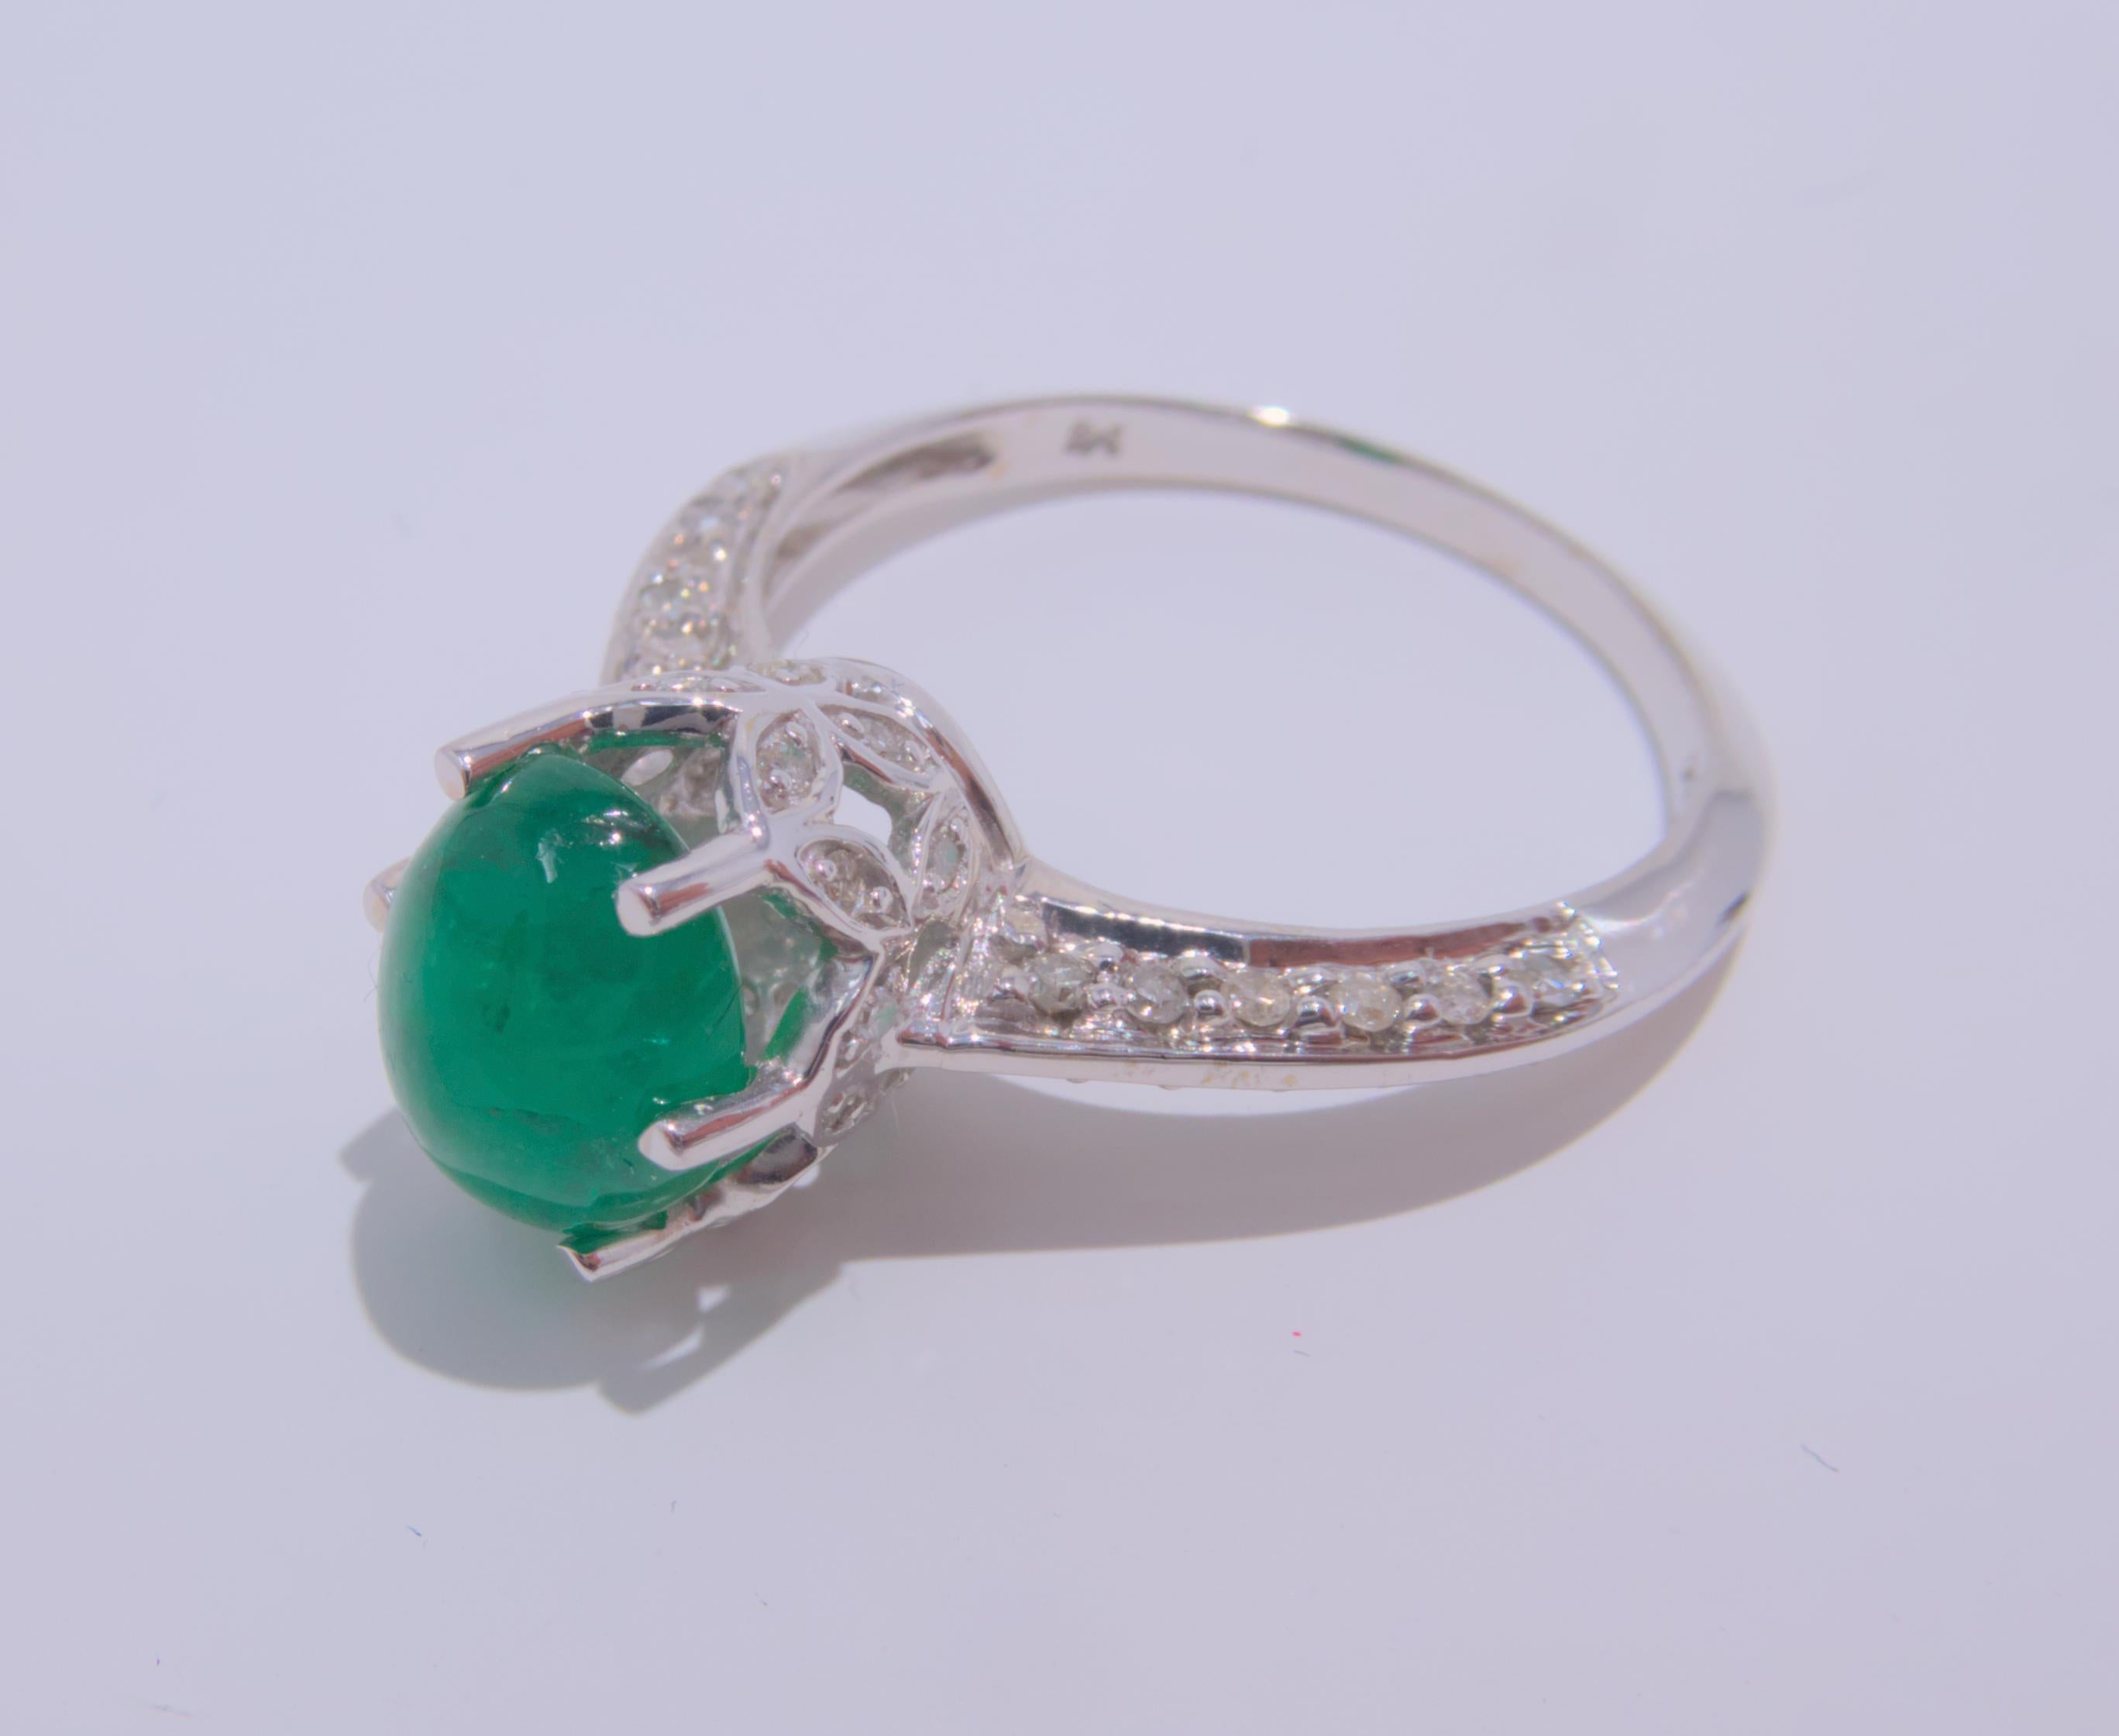 This stunning 14K white gold ring showcases a beautiful cabochon emerald at its center, surrounded by sparkling diamonds. The total estimated weight of the emerald is an impressive 1.90 carats, making it the perfect statement piece. The diamonds,